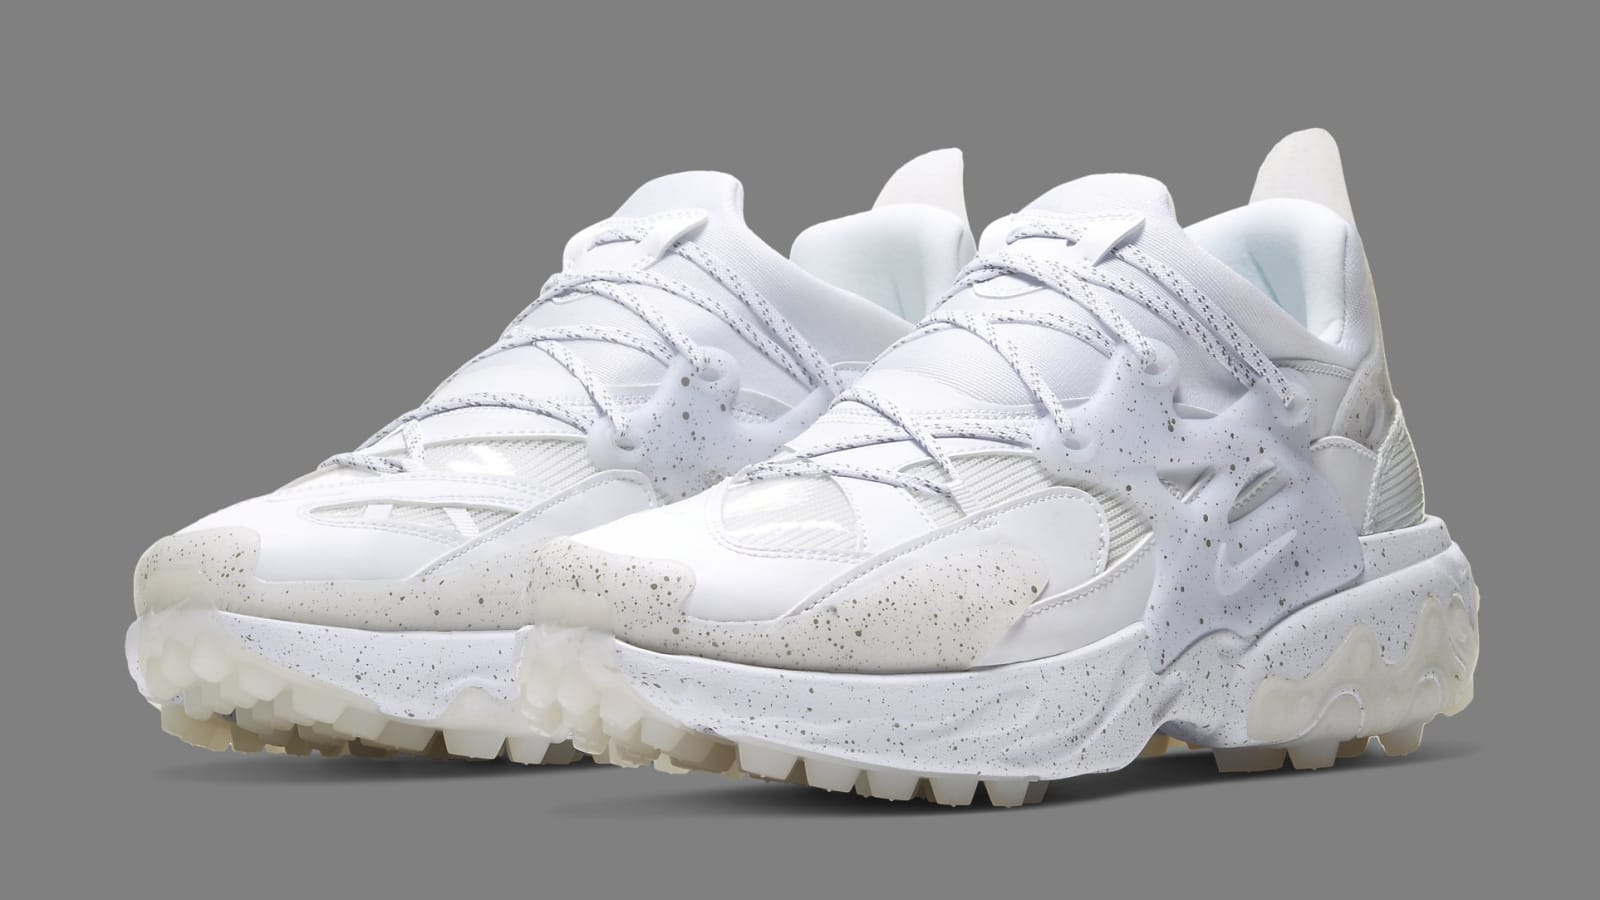 Undercover x Nike React Presto Coming Soon: Official Images